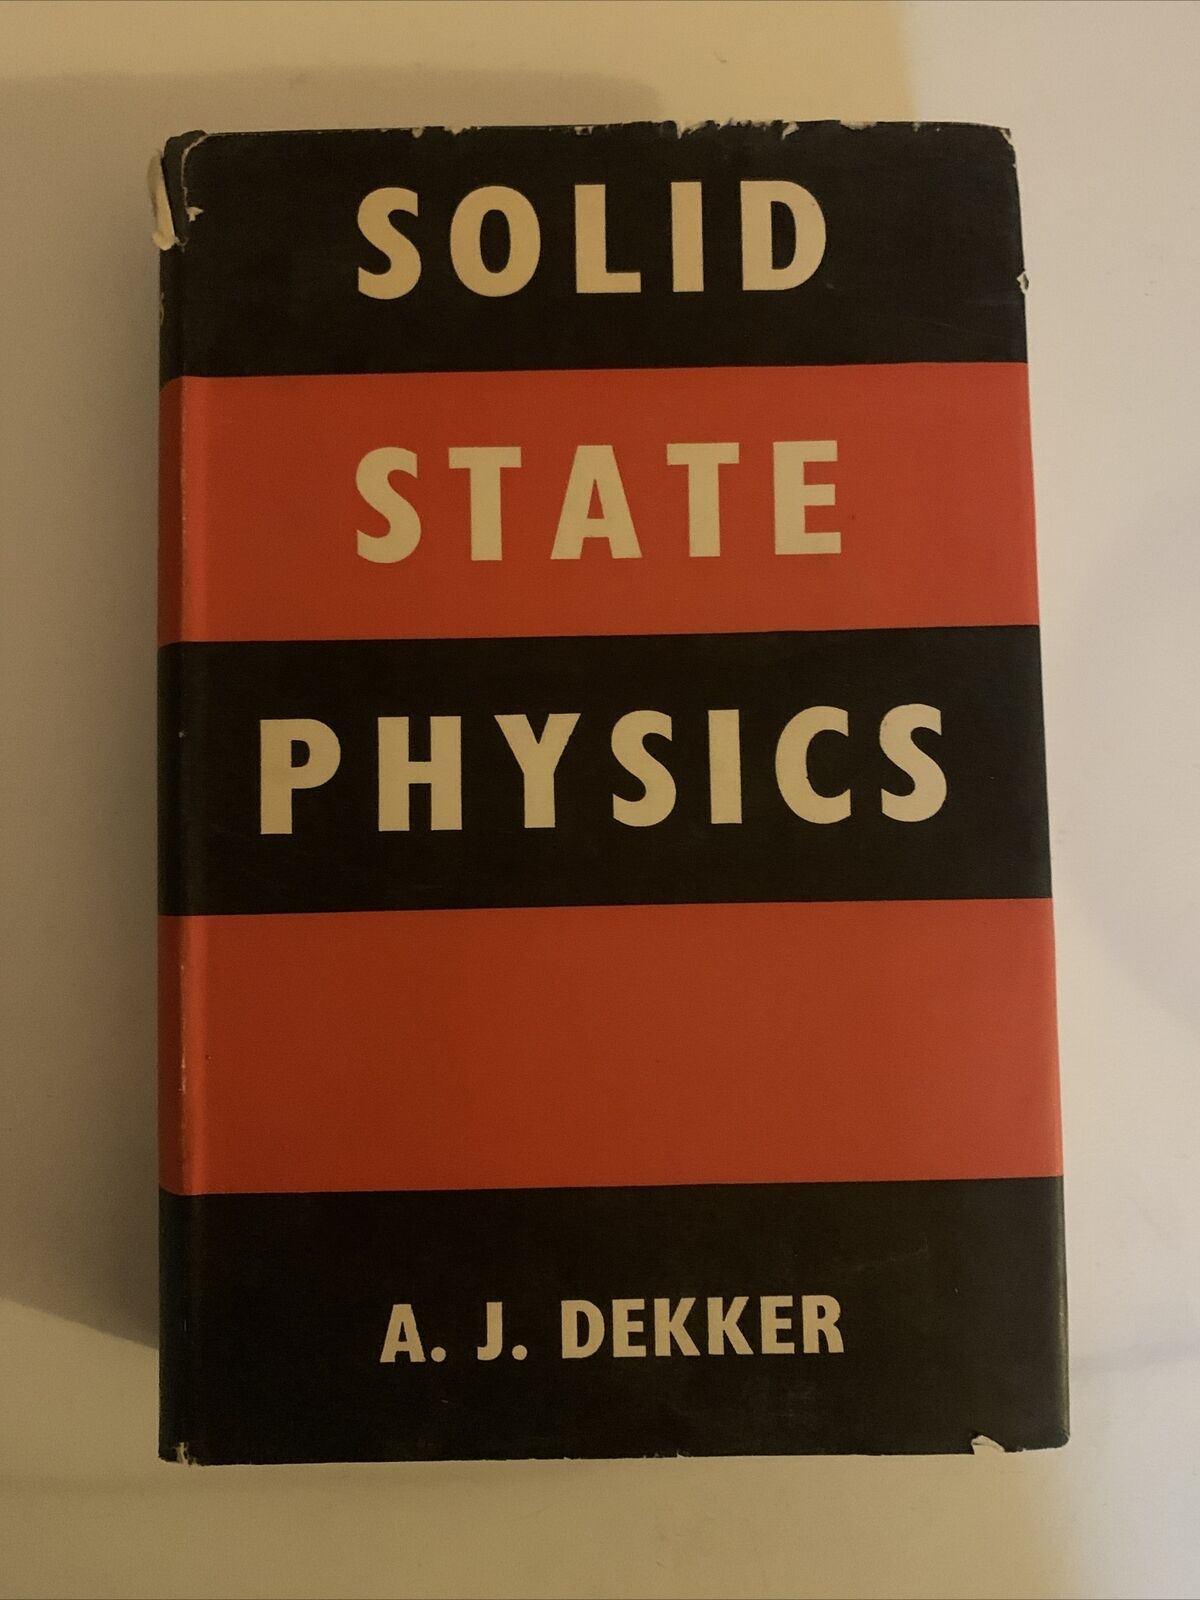 Solid State Physics by AJ Dekker 1964 Hardcover